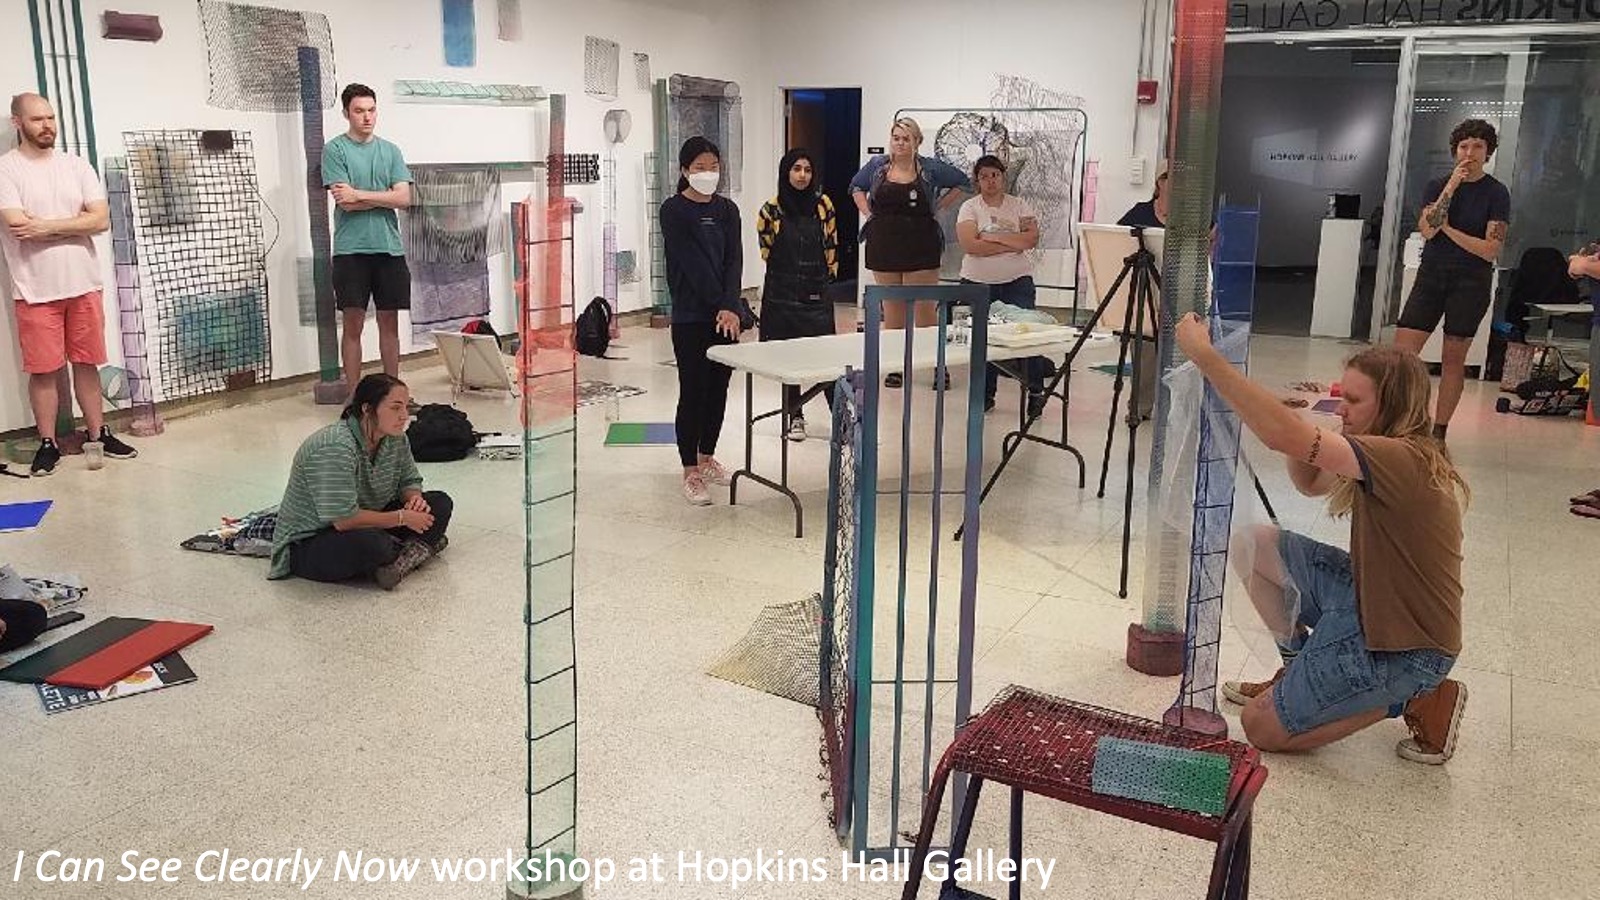 Visitors observe an artist during a workshop for the exhibition "I Can See Clearly Now."